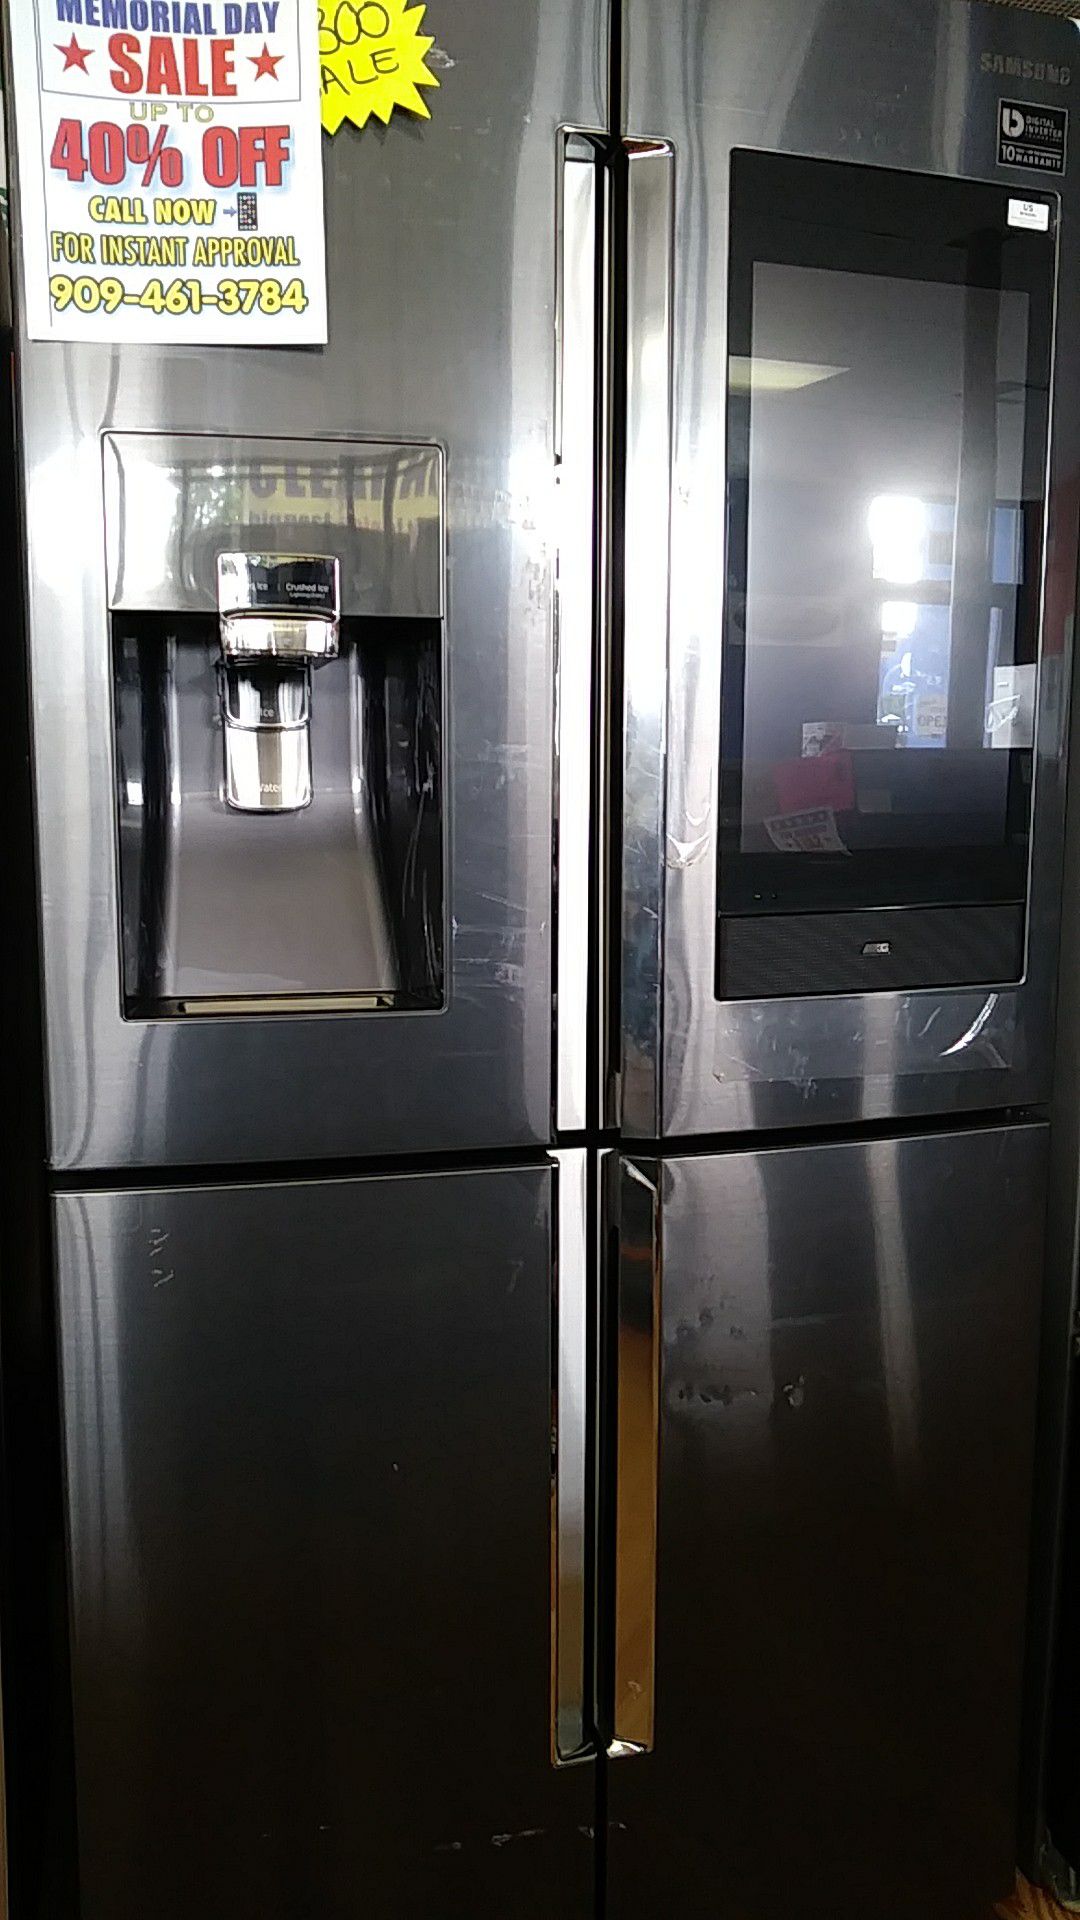 Samsung tablet fridge! In payments